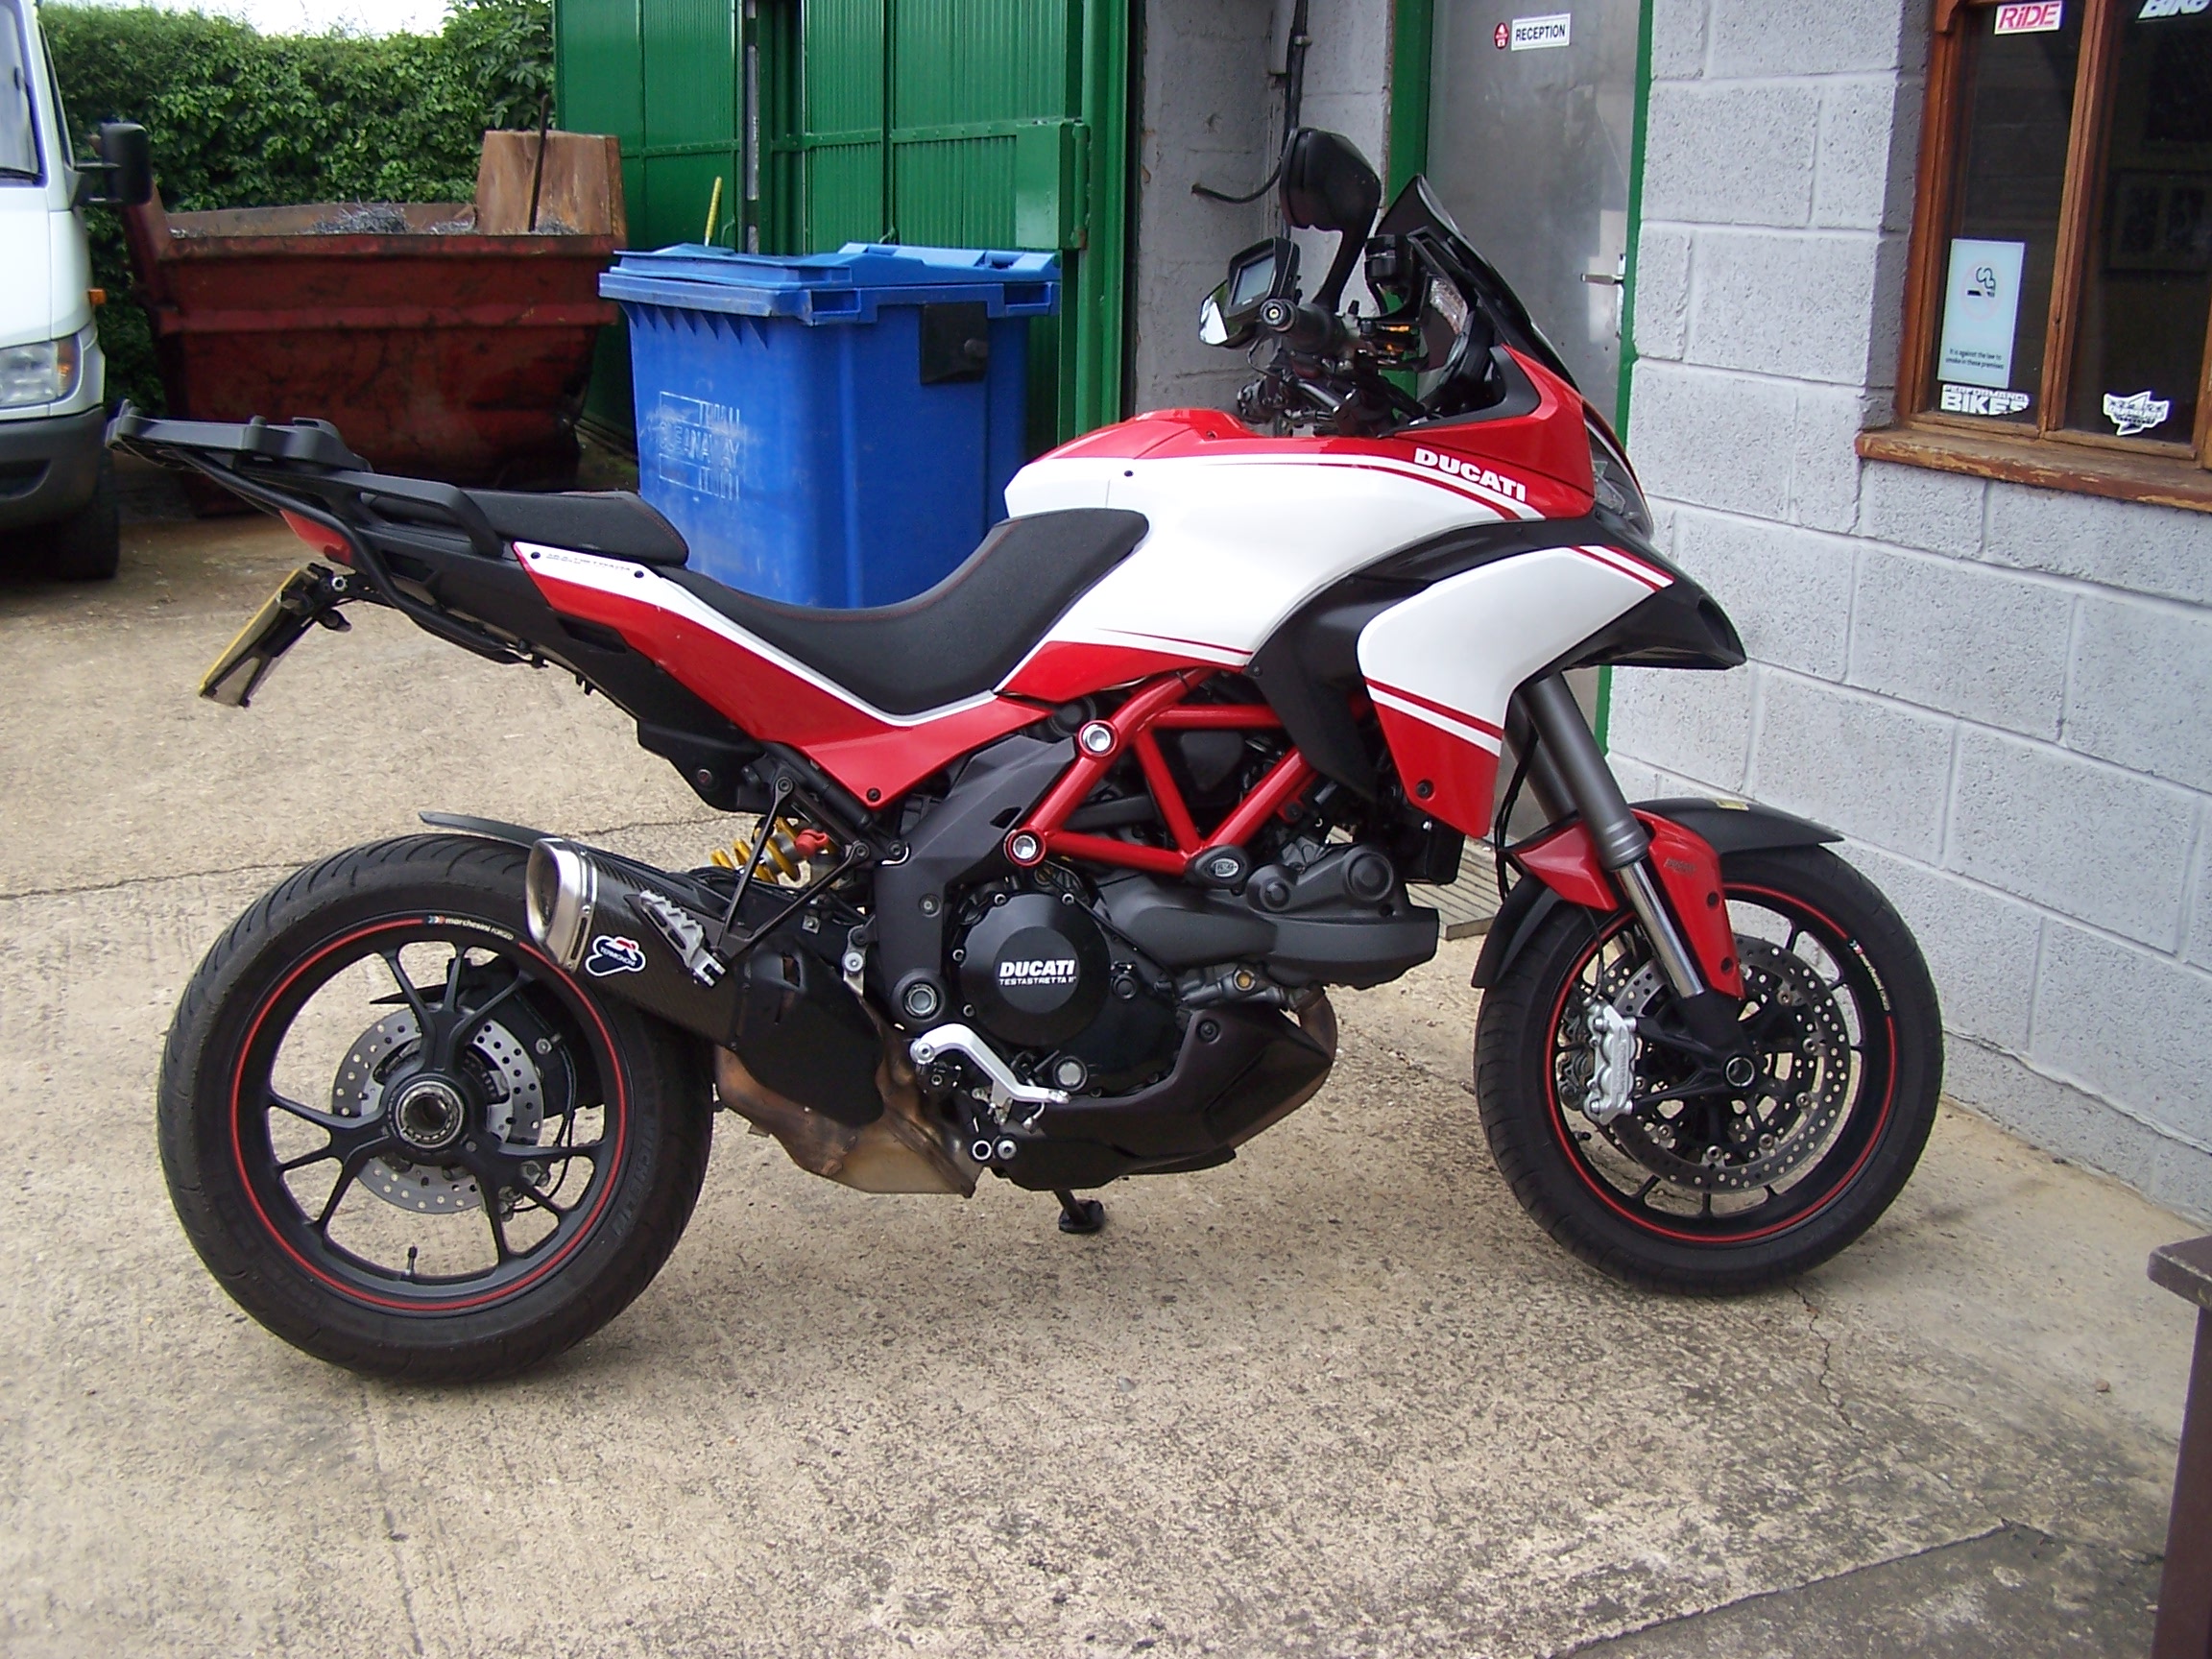 Ducati 1200 Multistrada ECU remap to get rid of snatchy throttle response and make it more off-road friendly